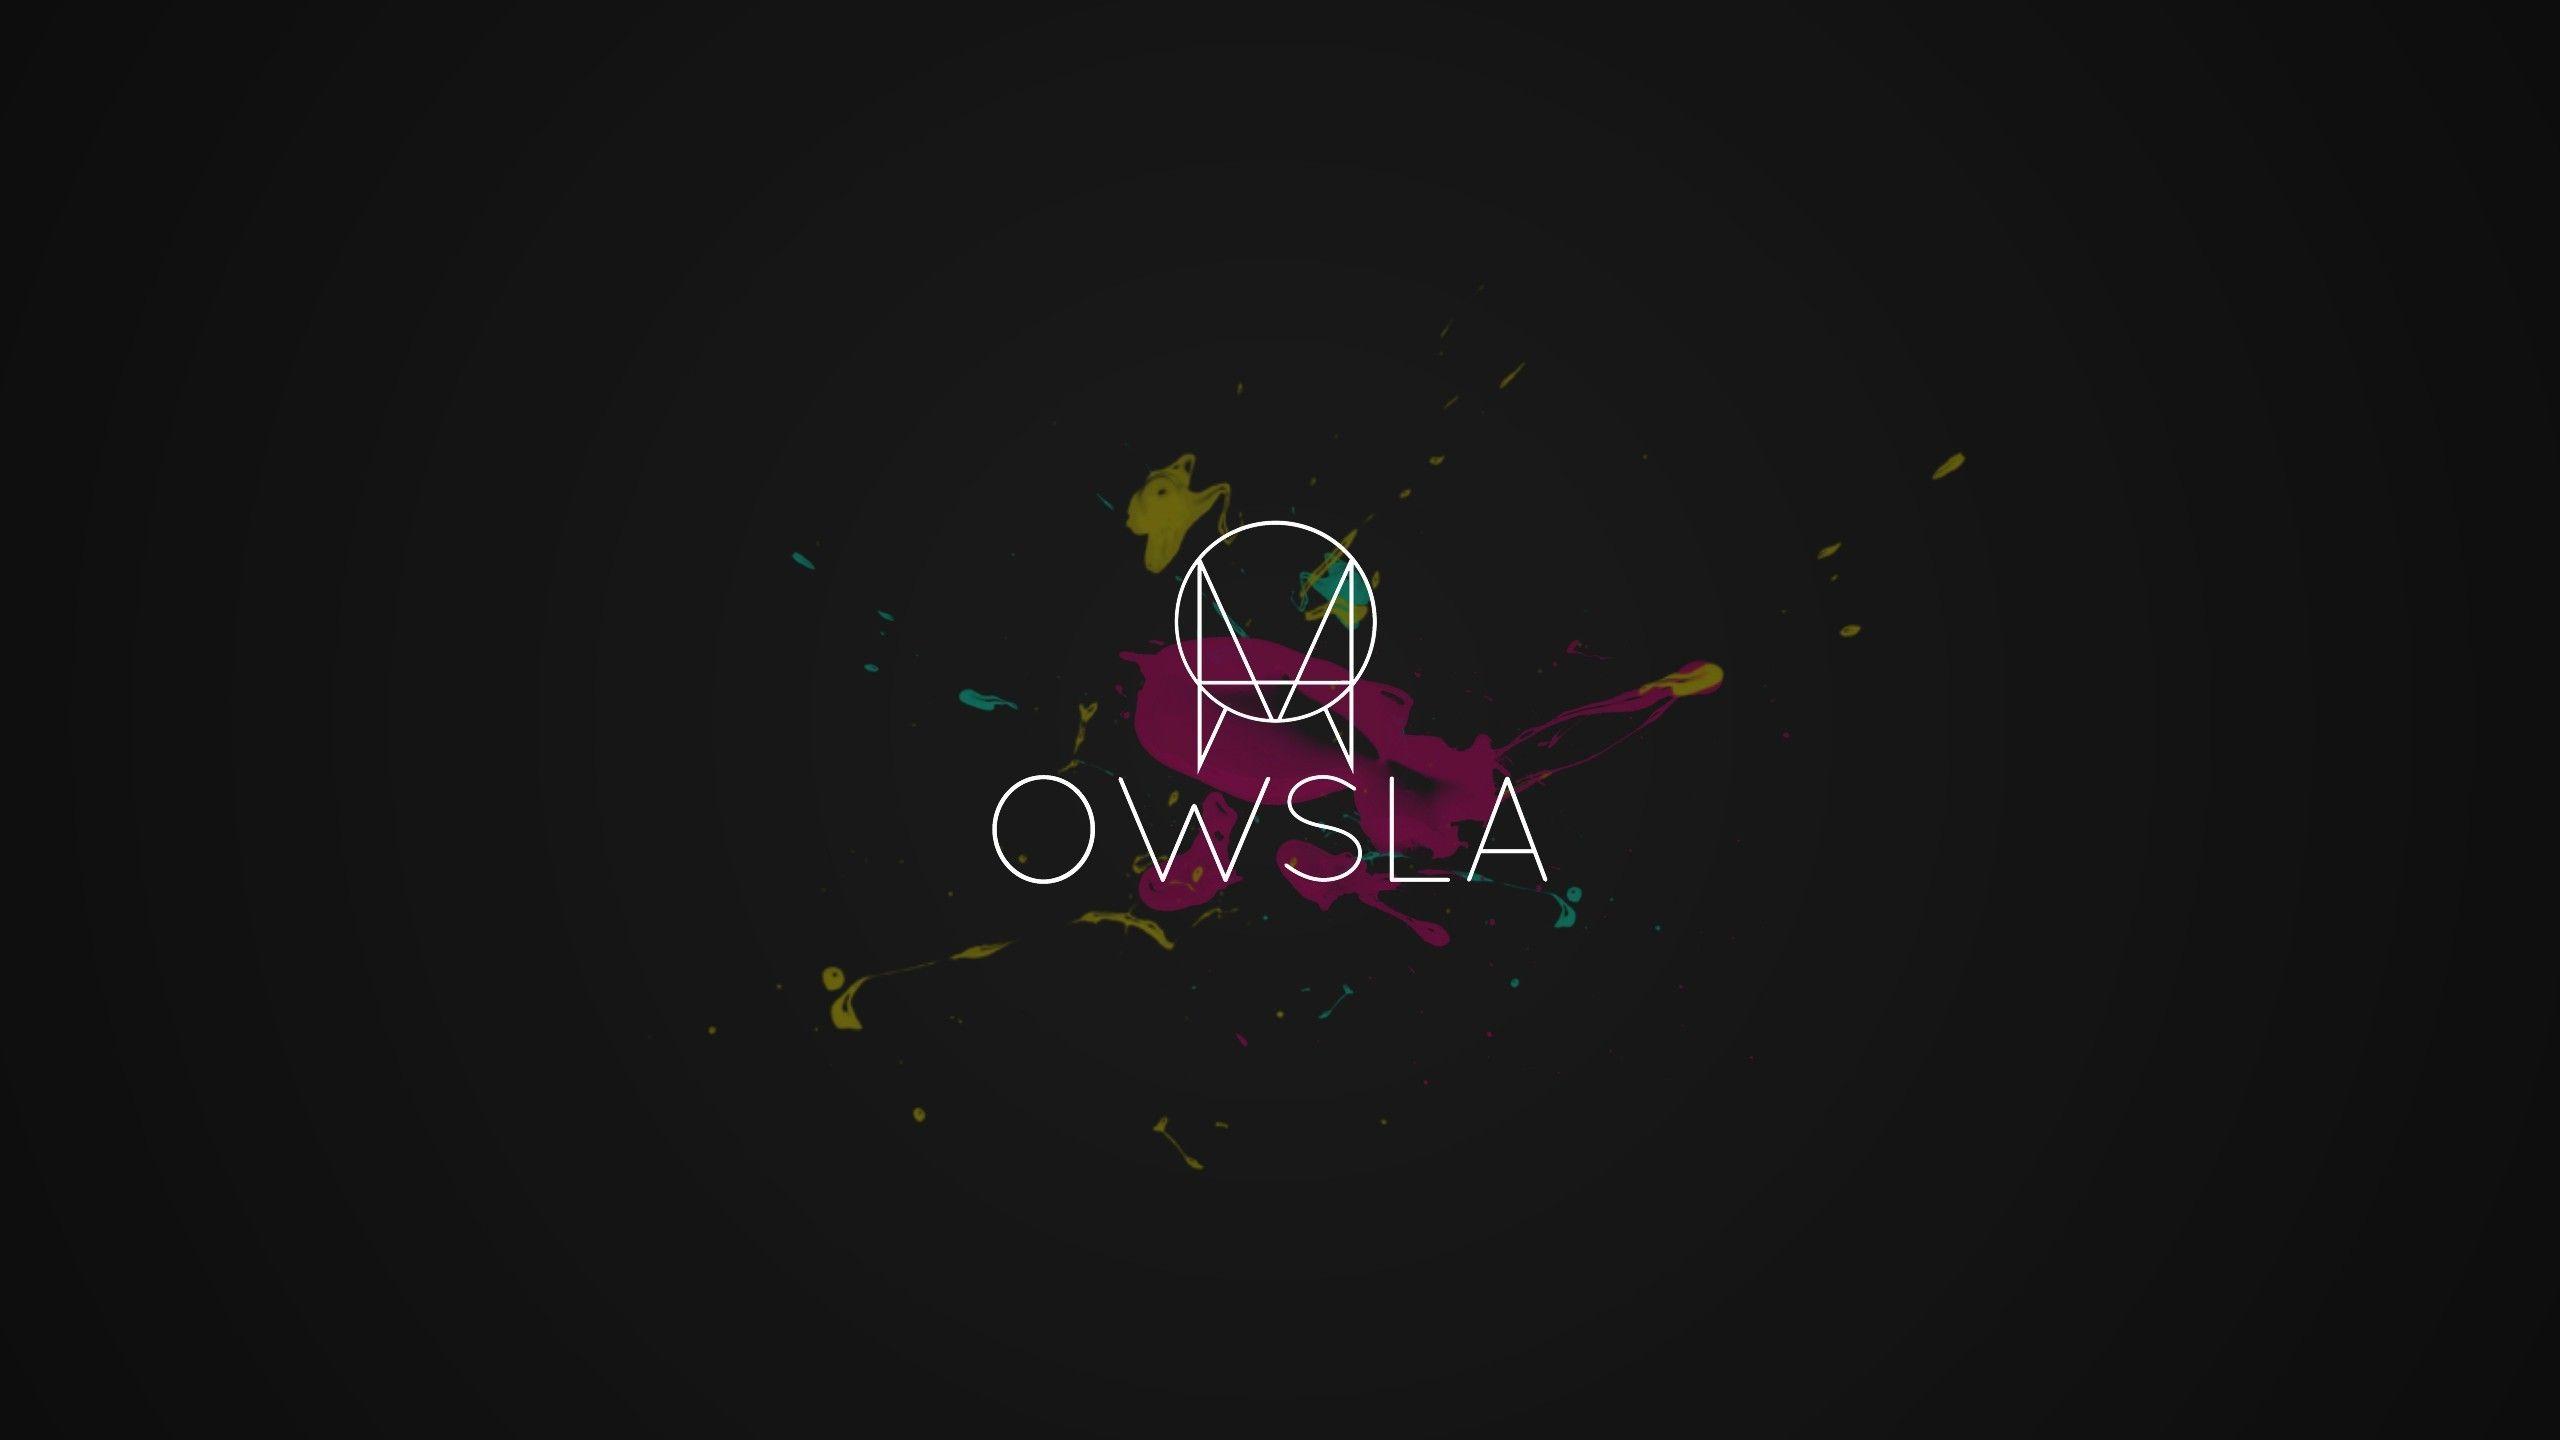 Owsla wallpapers